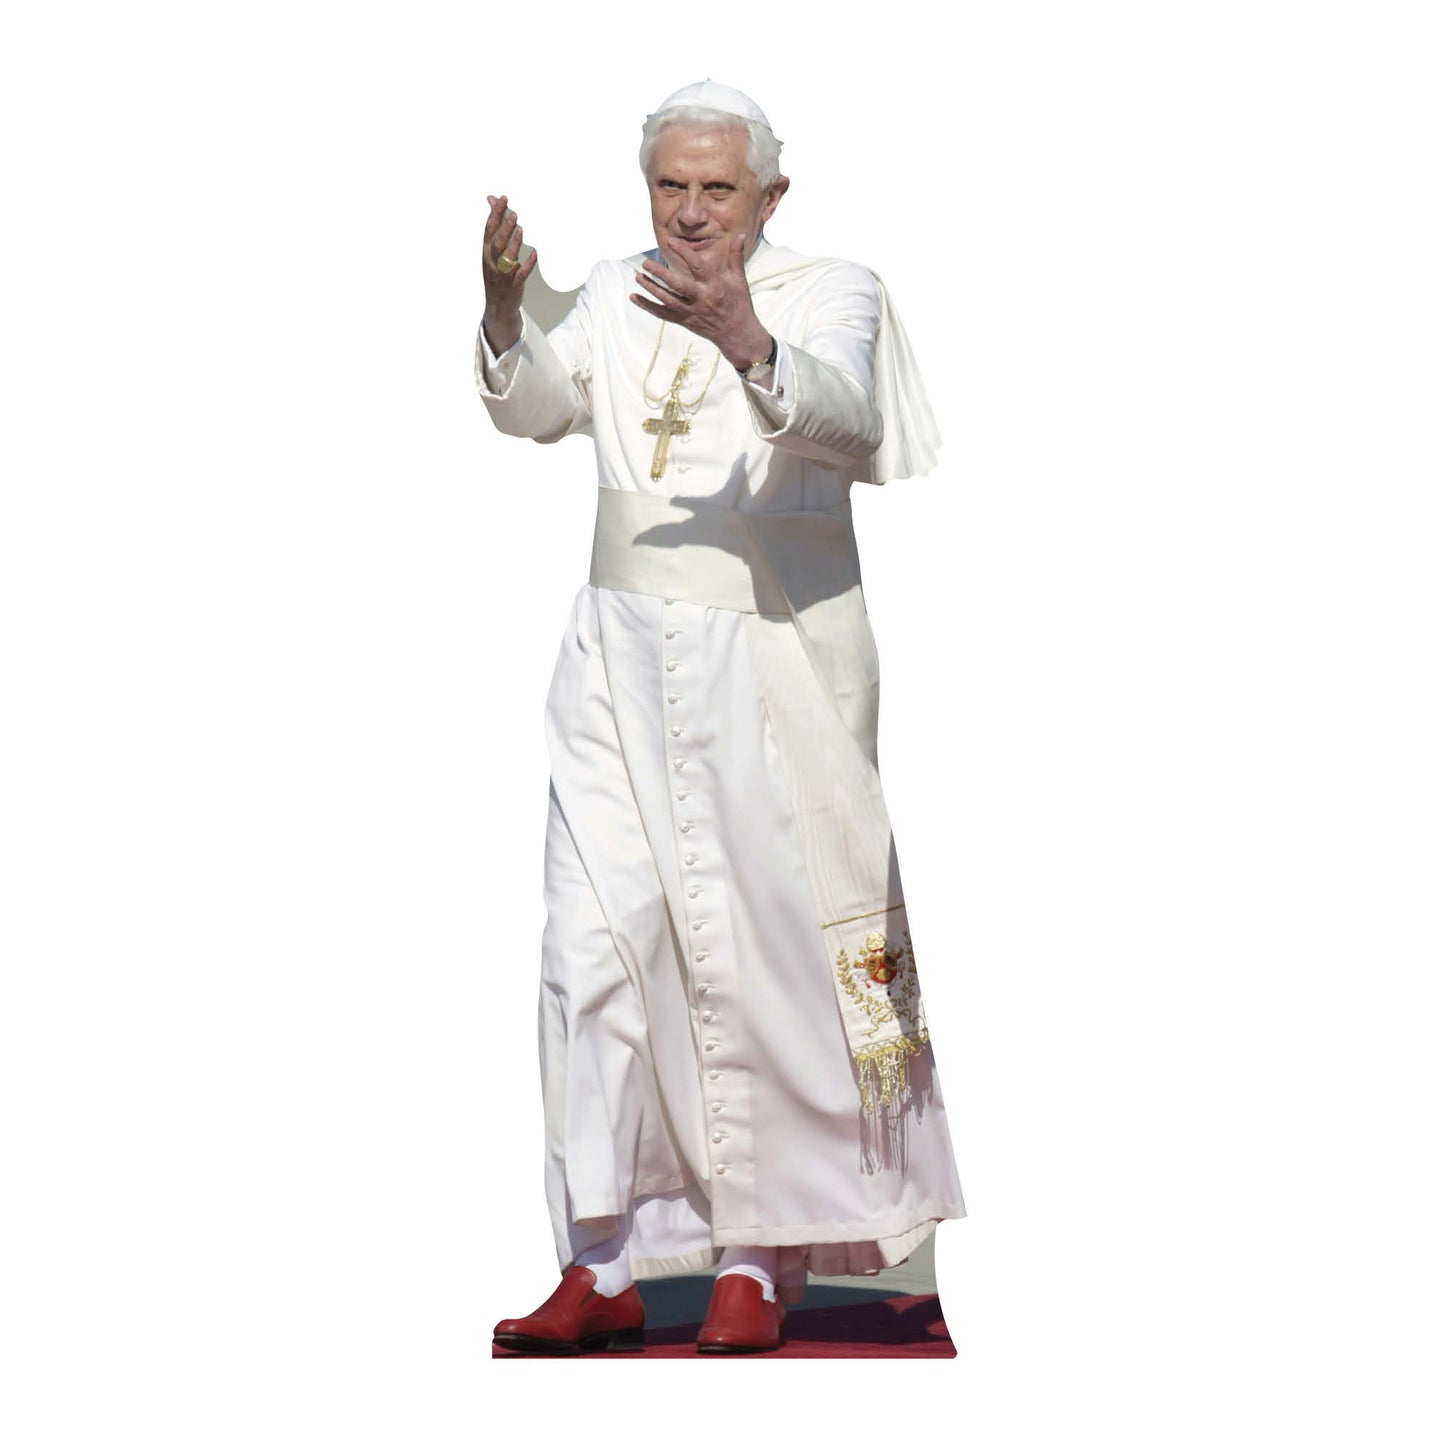 SC191 The Pope Cardboard Cut Out Height 181cm